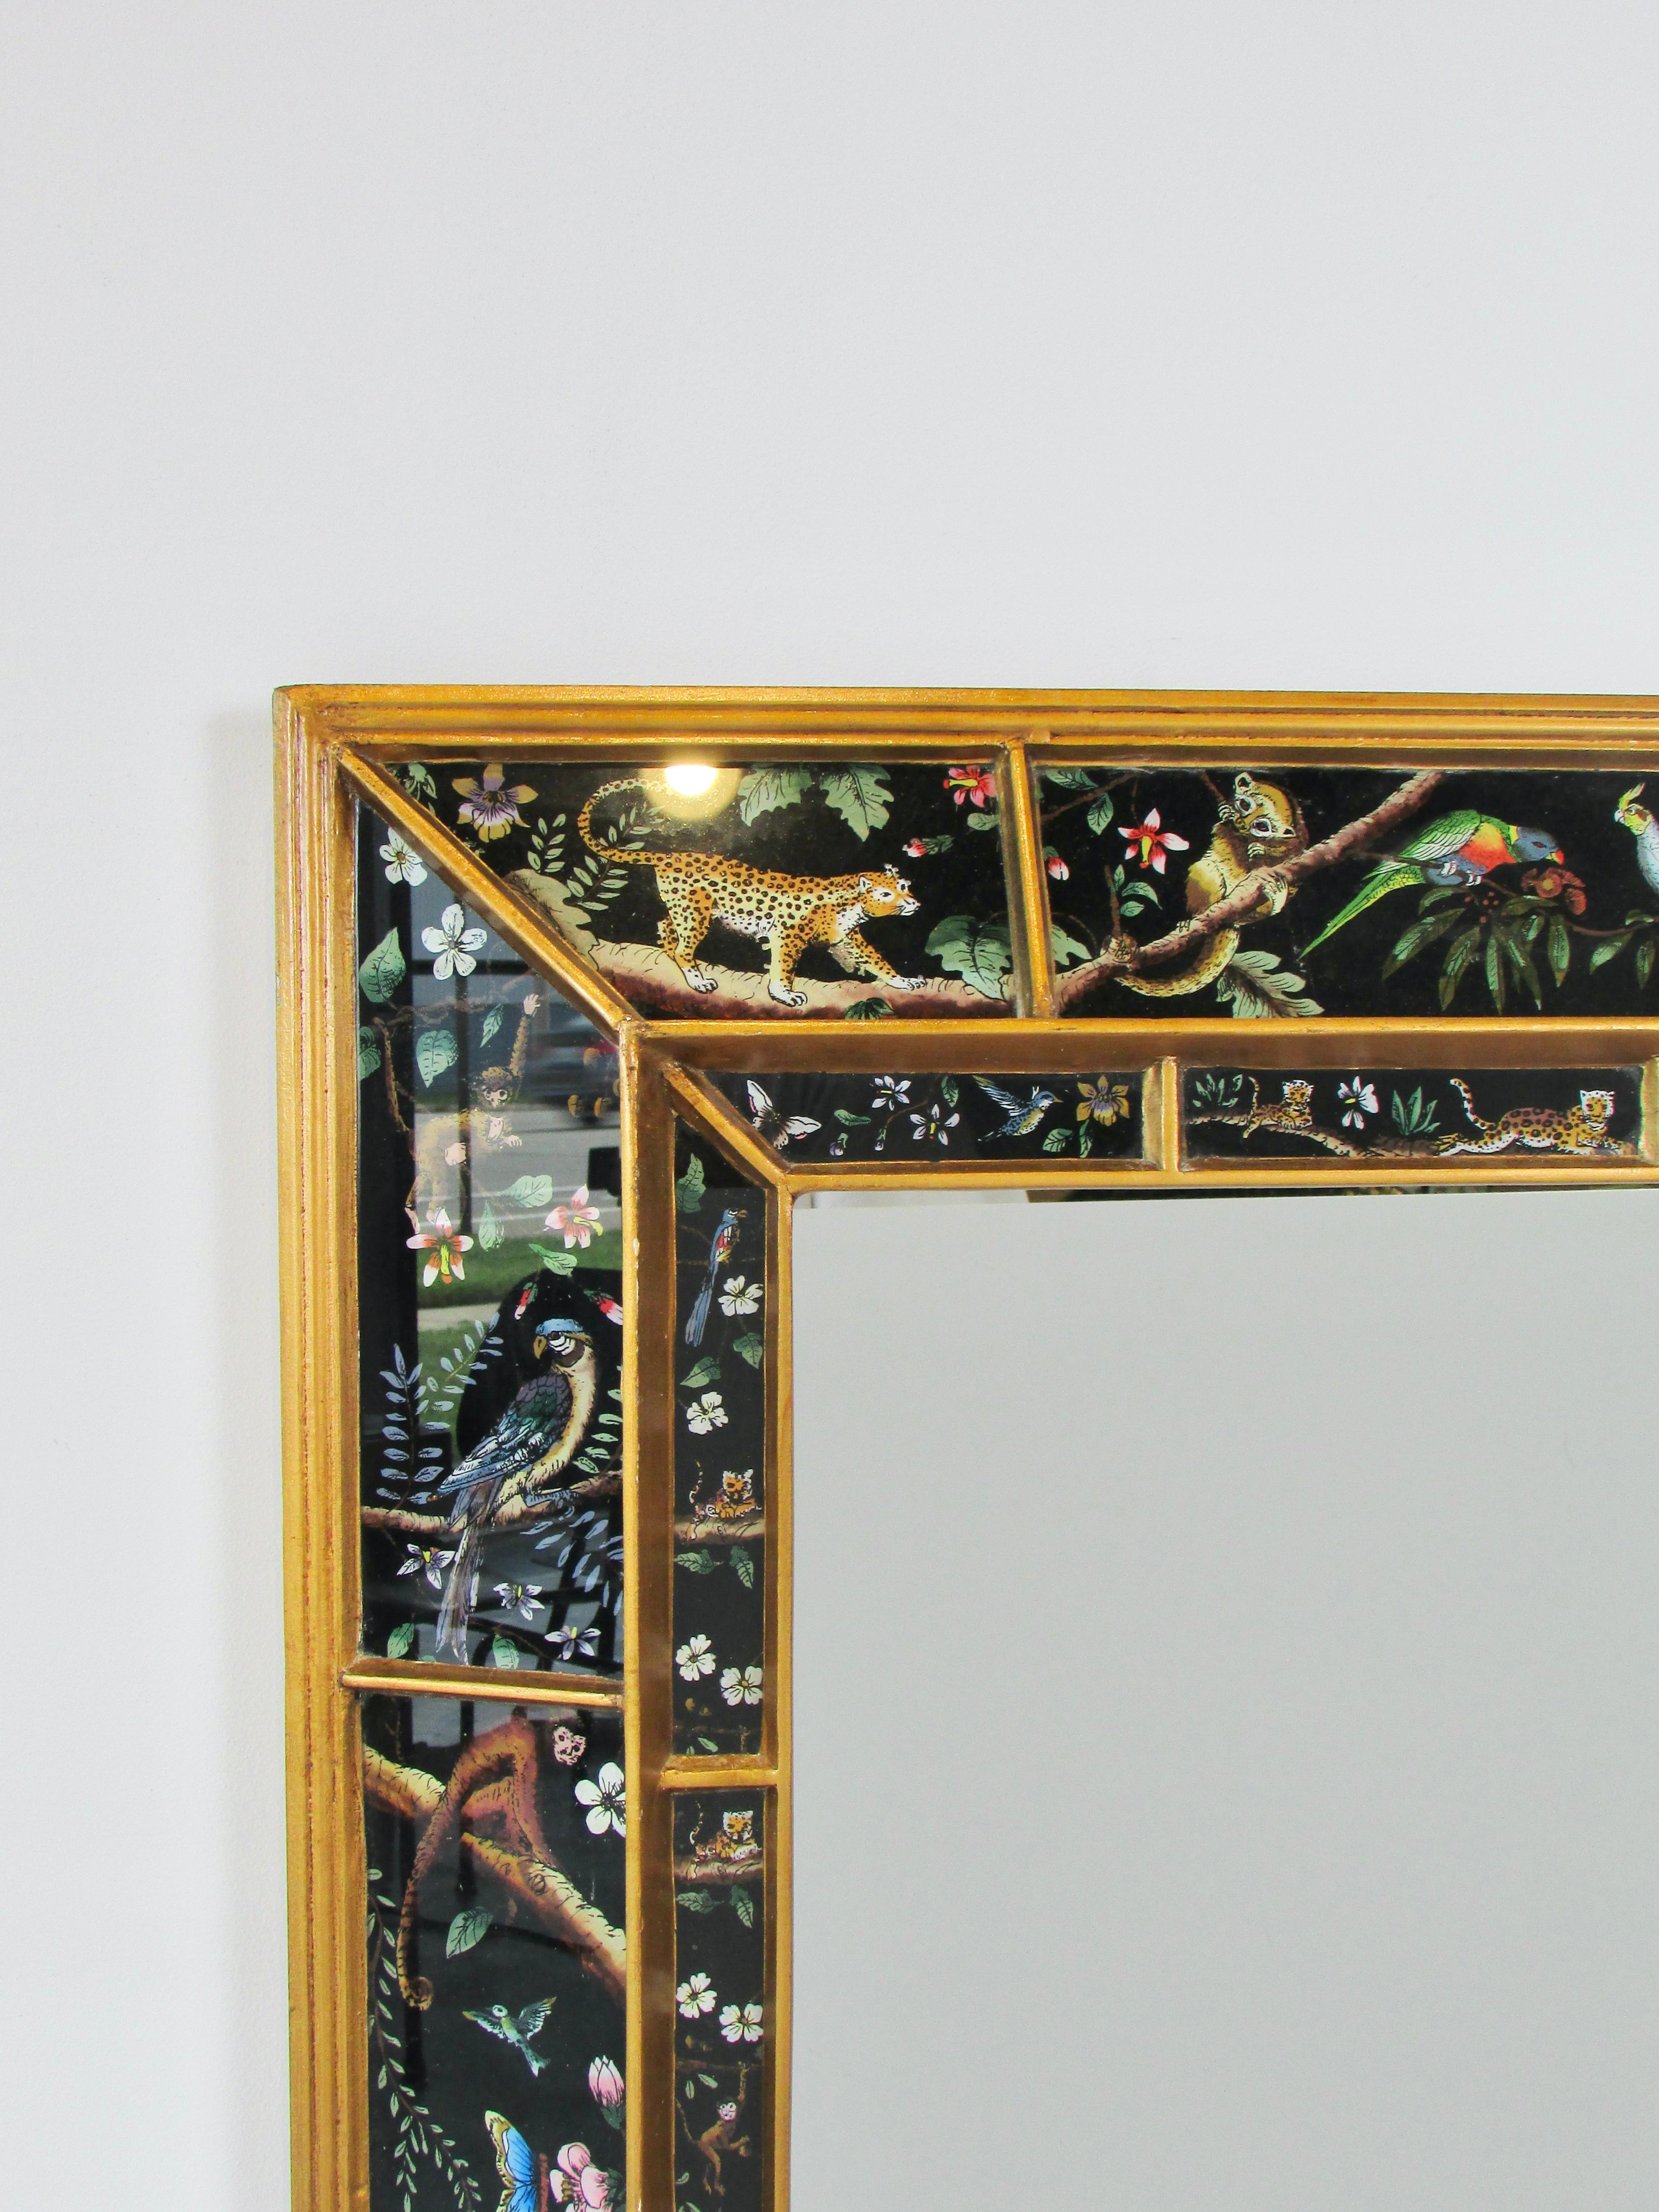 Chinoiserie Wall Mirror with Vivid Exotic Panther Tiger Monkey Birds Butterfly Images